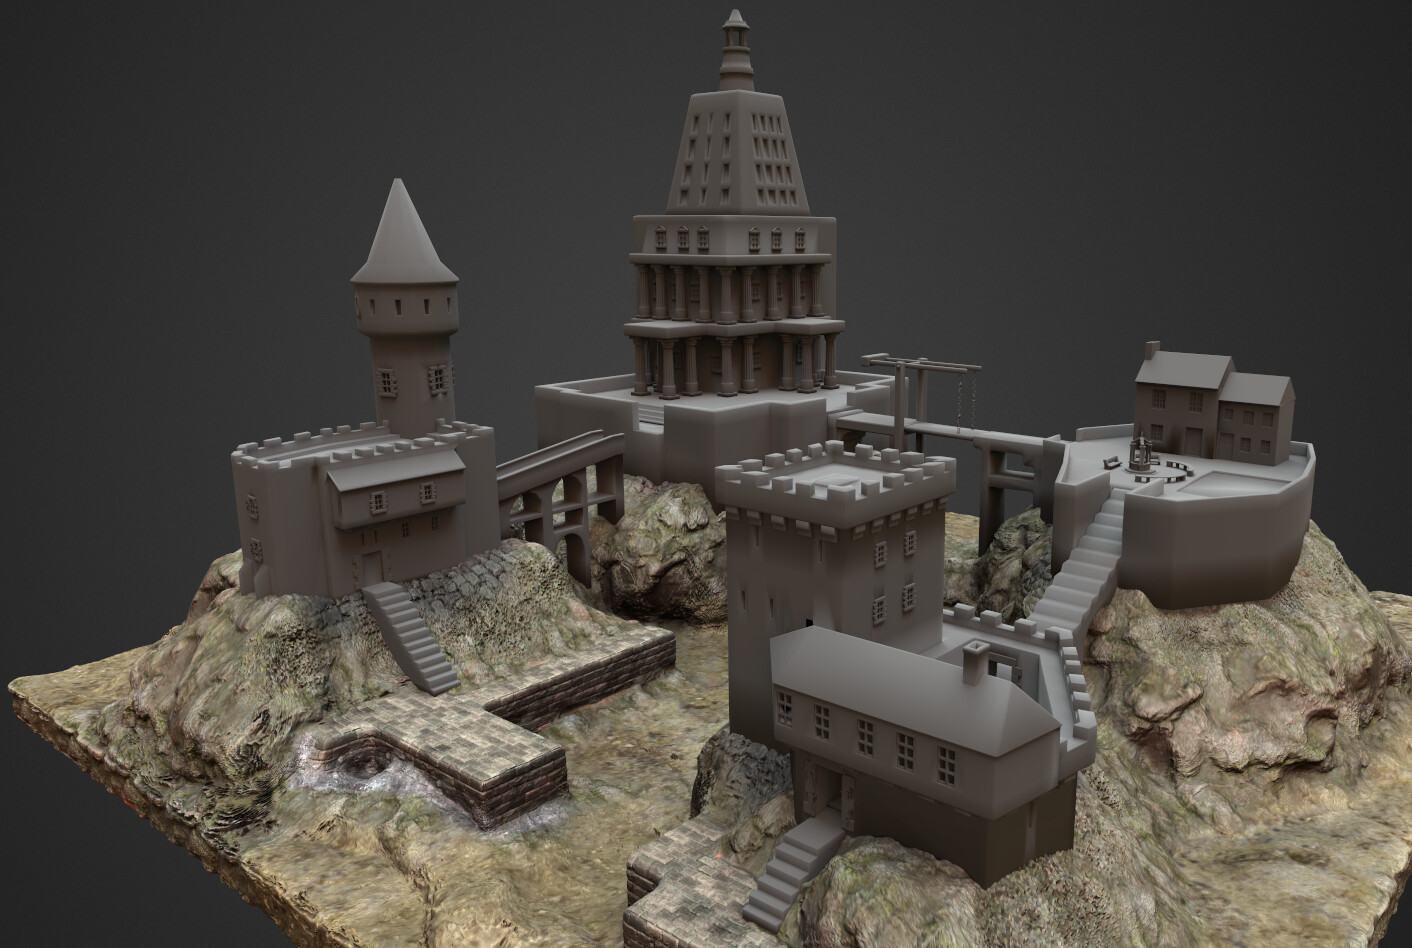 The modeling almost done. The tower on the left was completely out of proportions, so I reduced its size later.